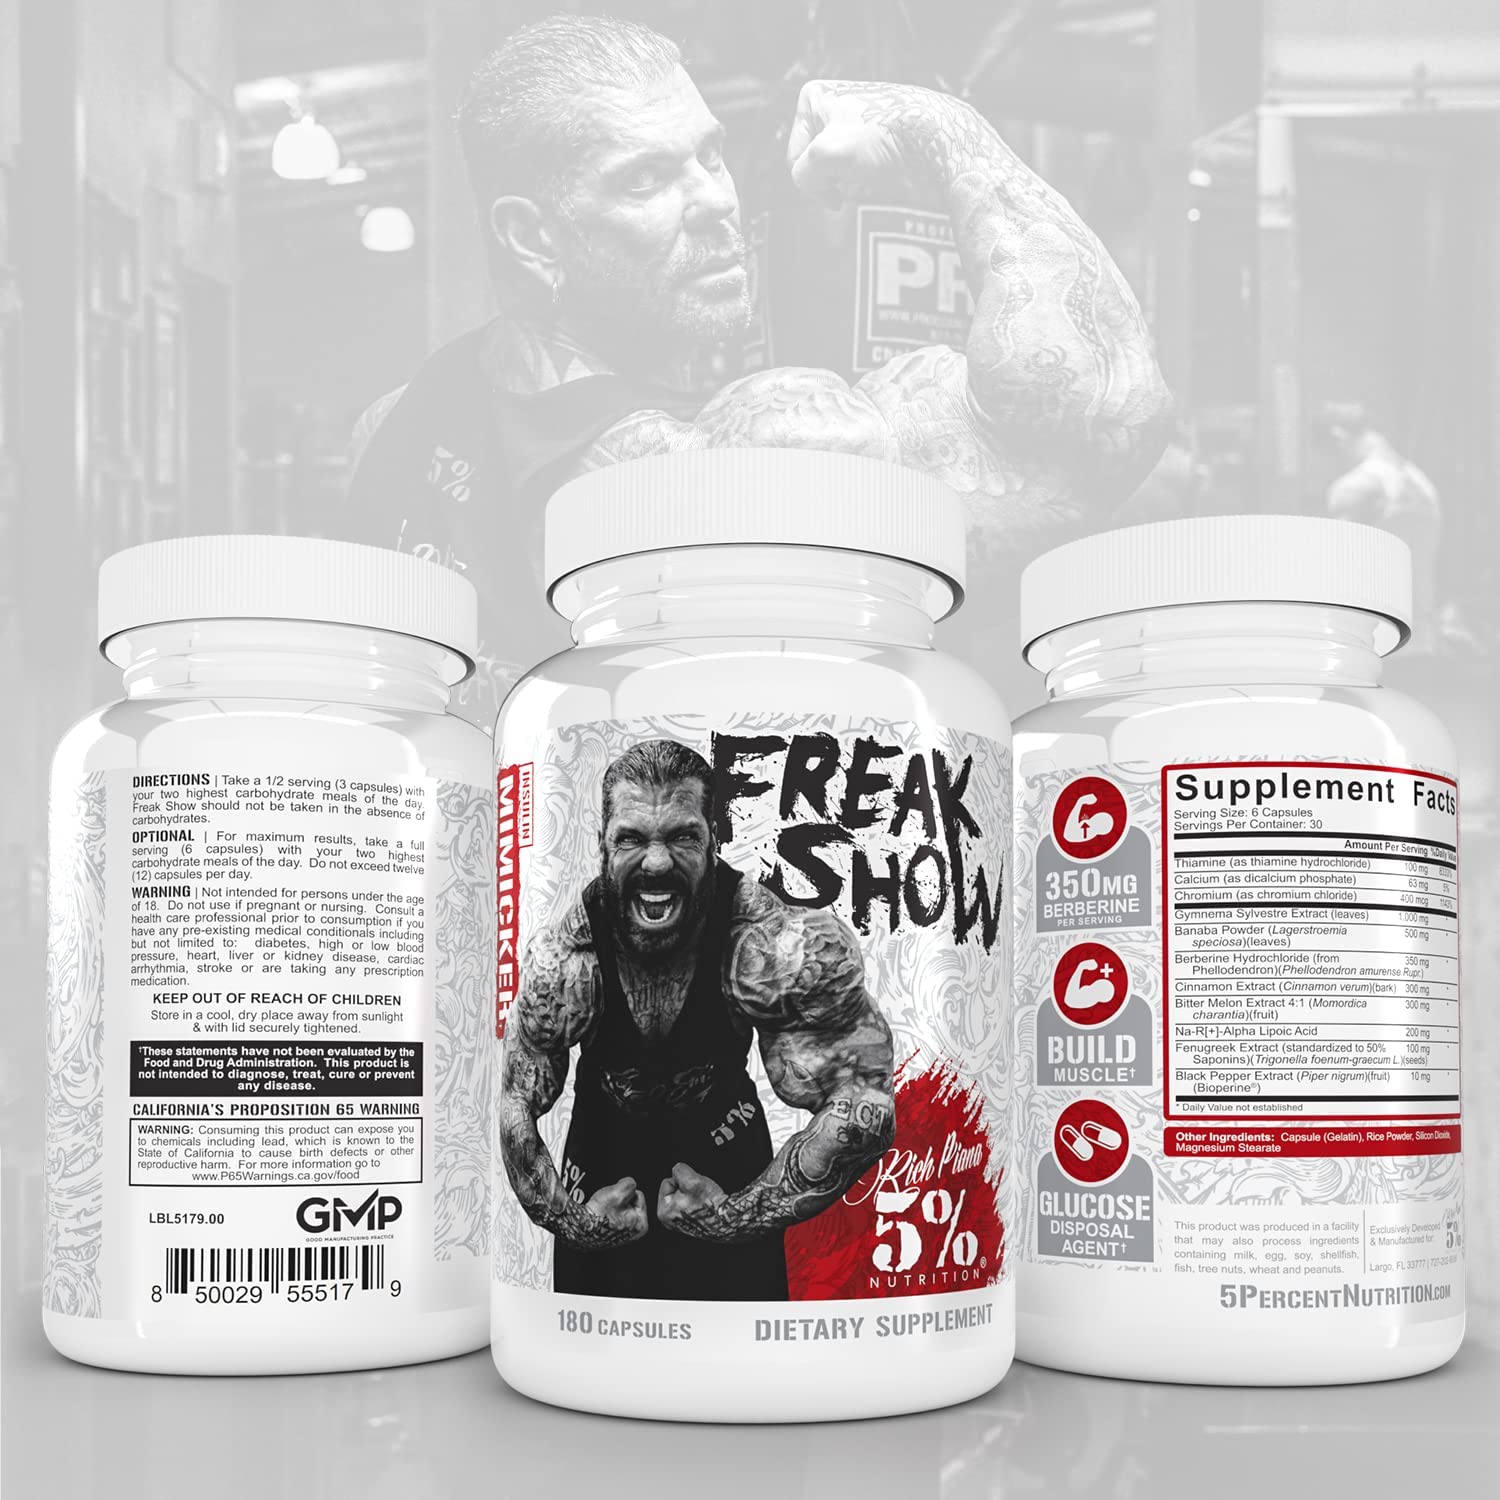 5% Nutrition Rich Piana Freak Show | Carb Partitioner, Glucose Disposal Agent & Insulin Support Supplement for Building Muscle | Berberine, Gymnema Sylvestre, Banaba Powder |180 Capsules (30 Days)